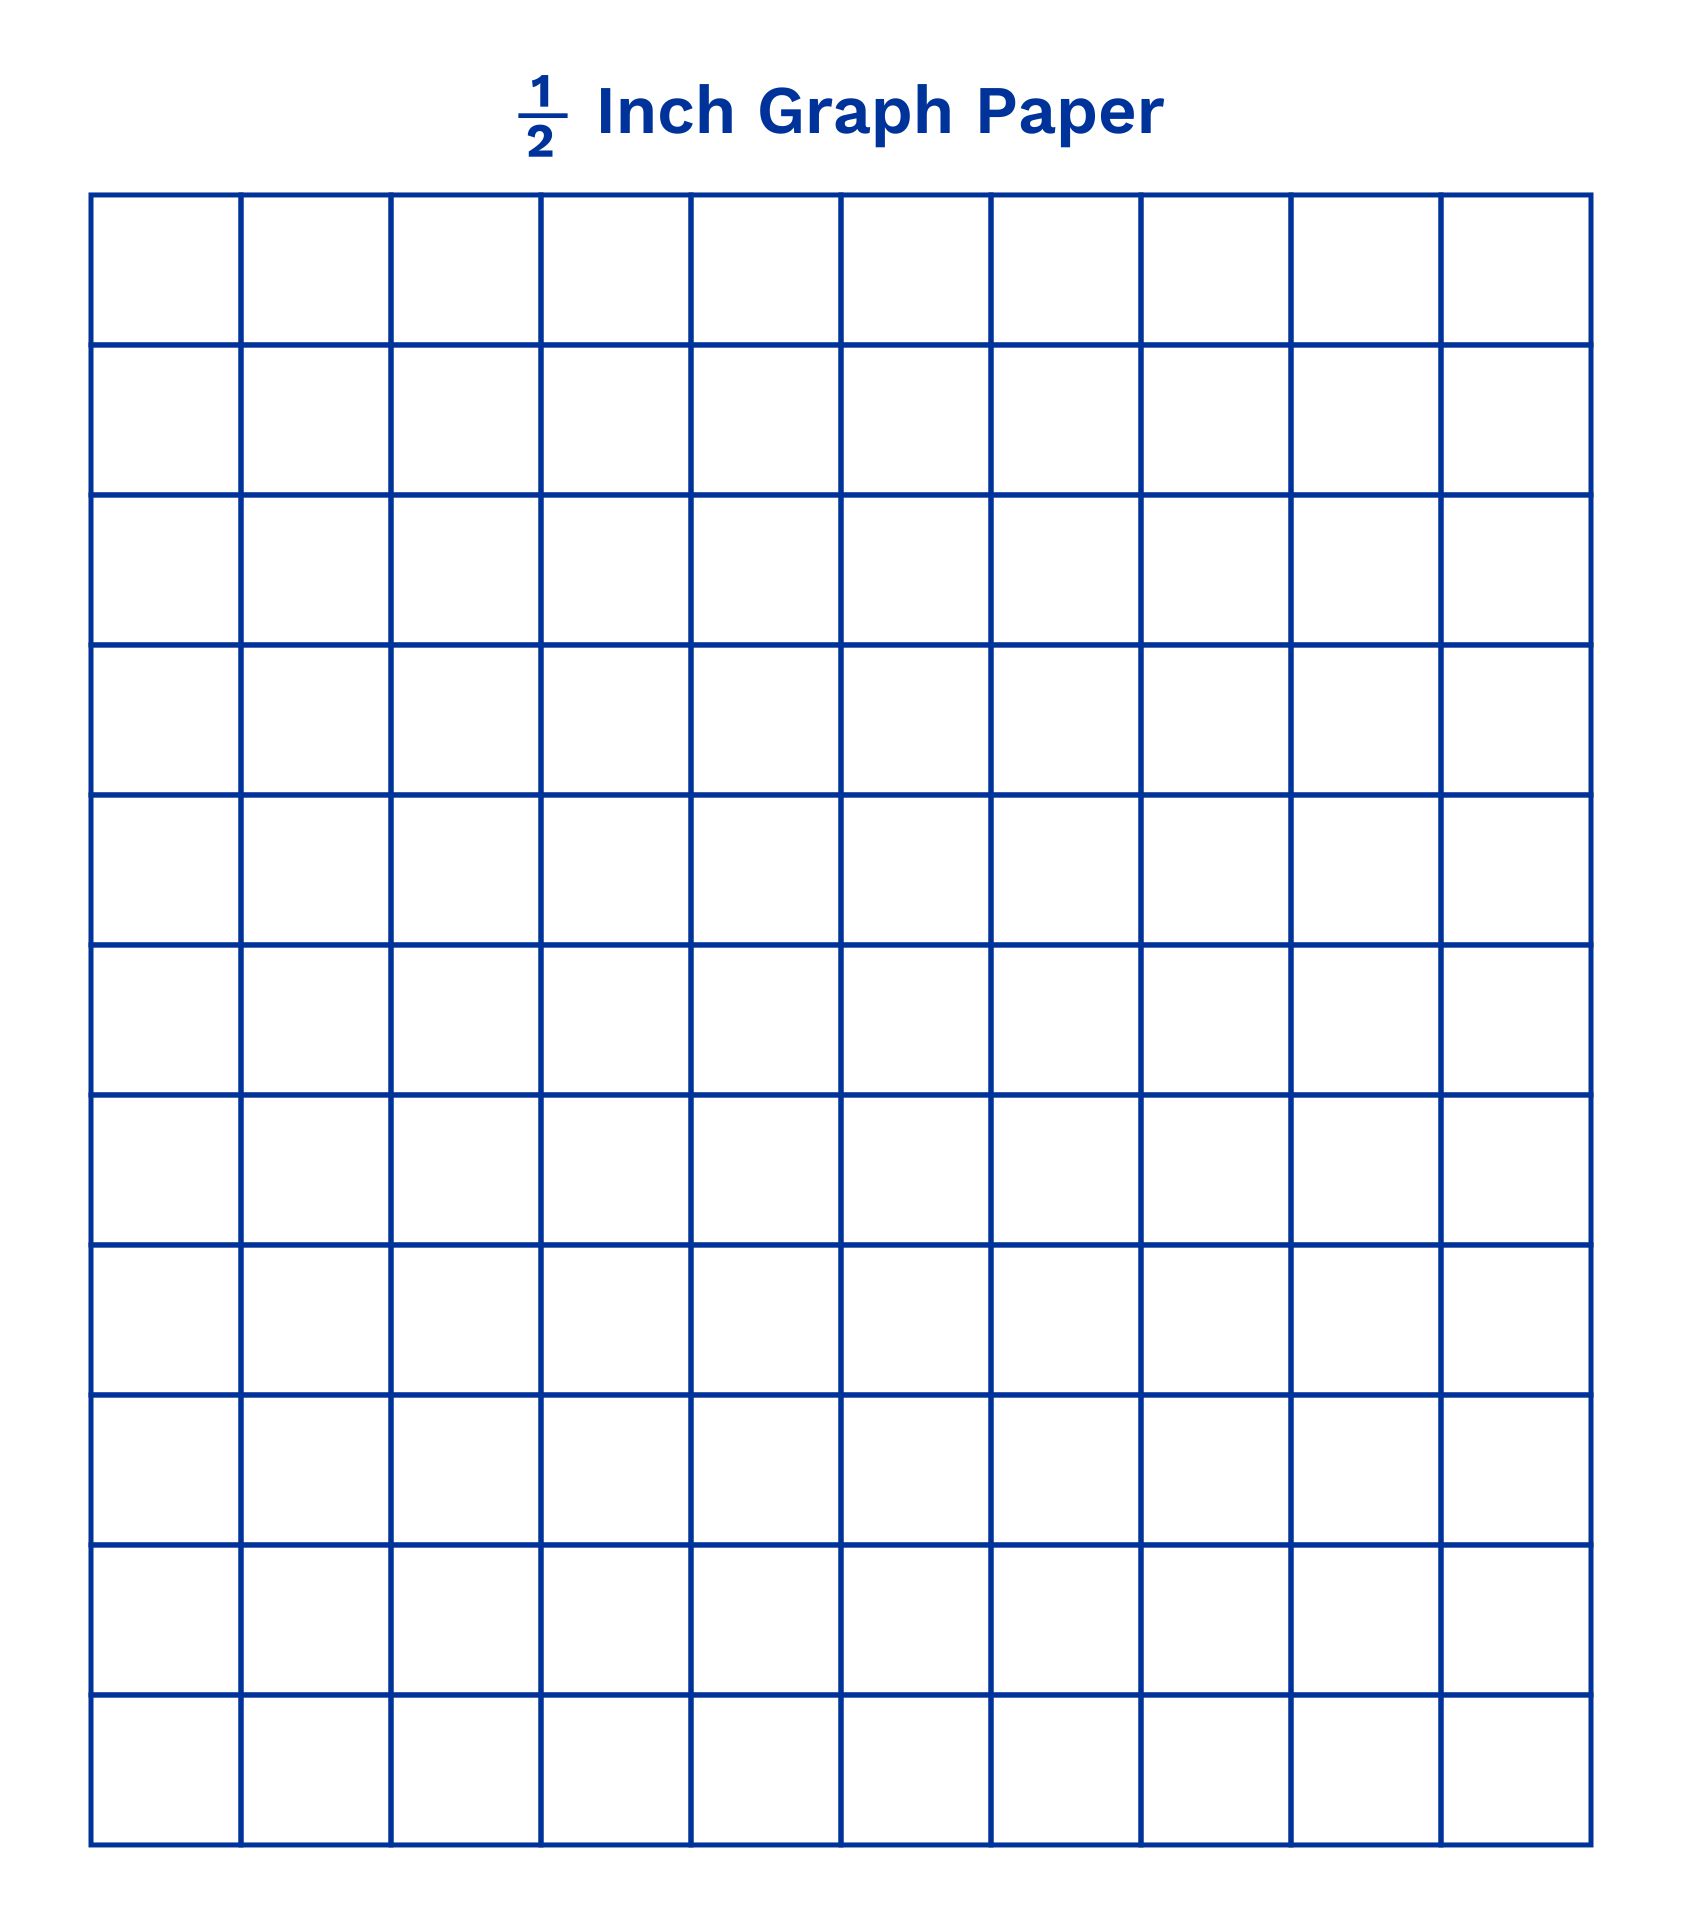 Free Printable Graph Paper 1 2 Inch_56341